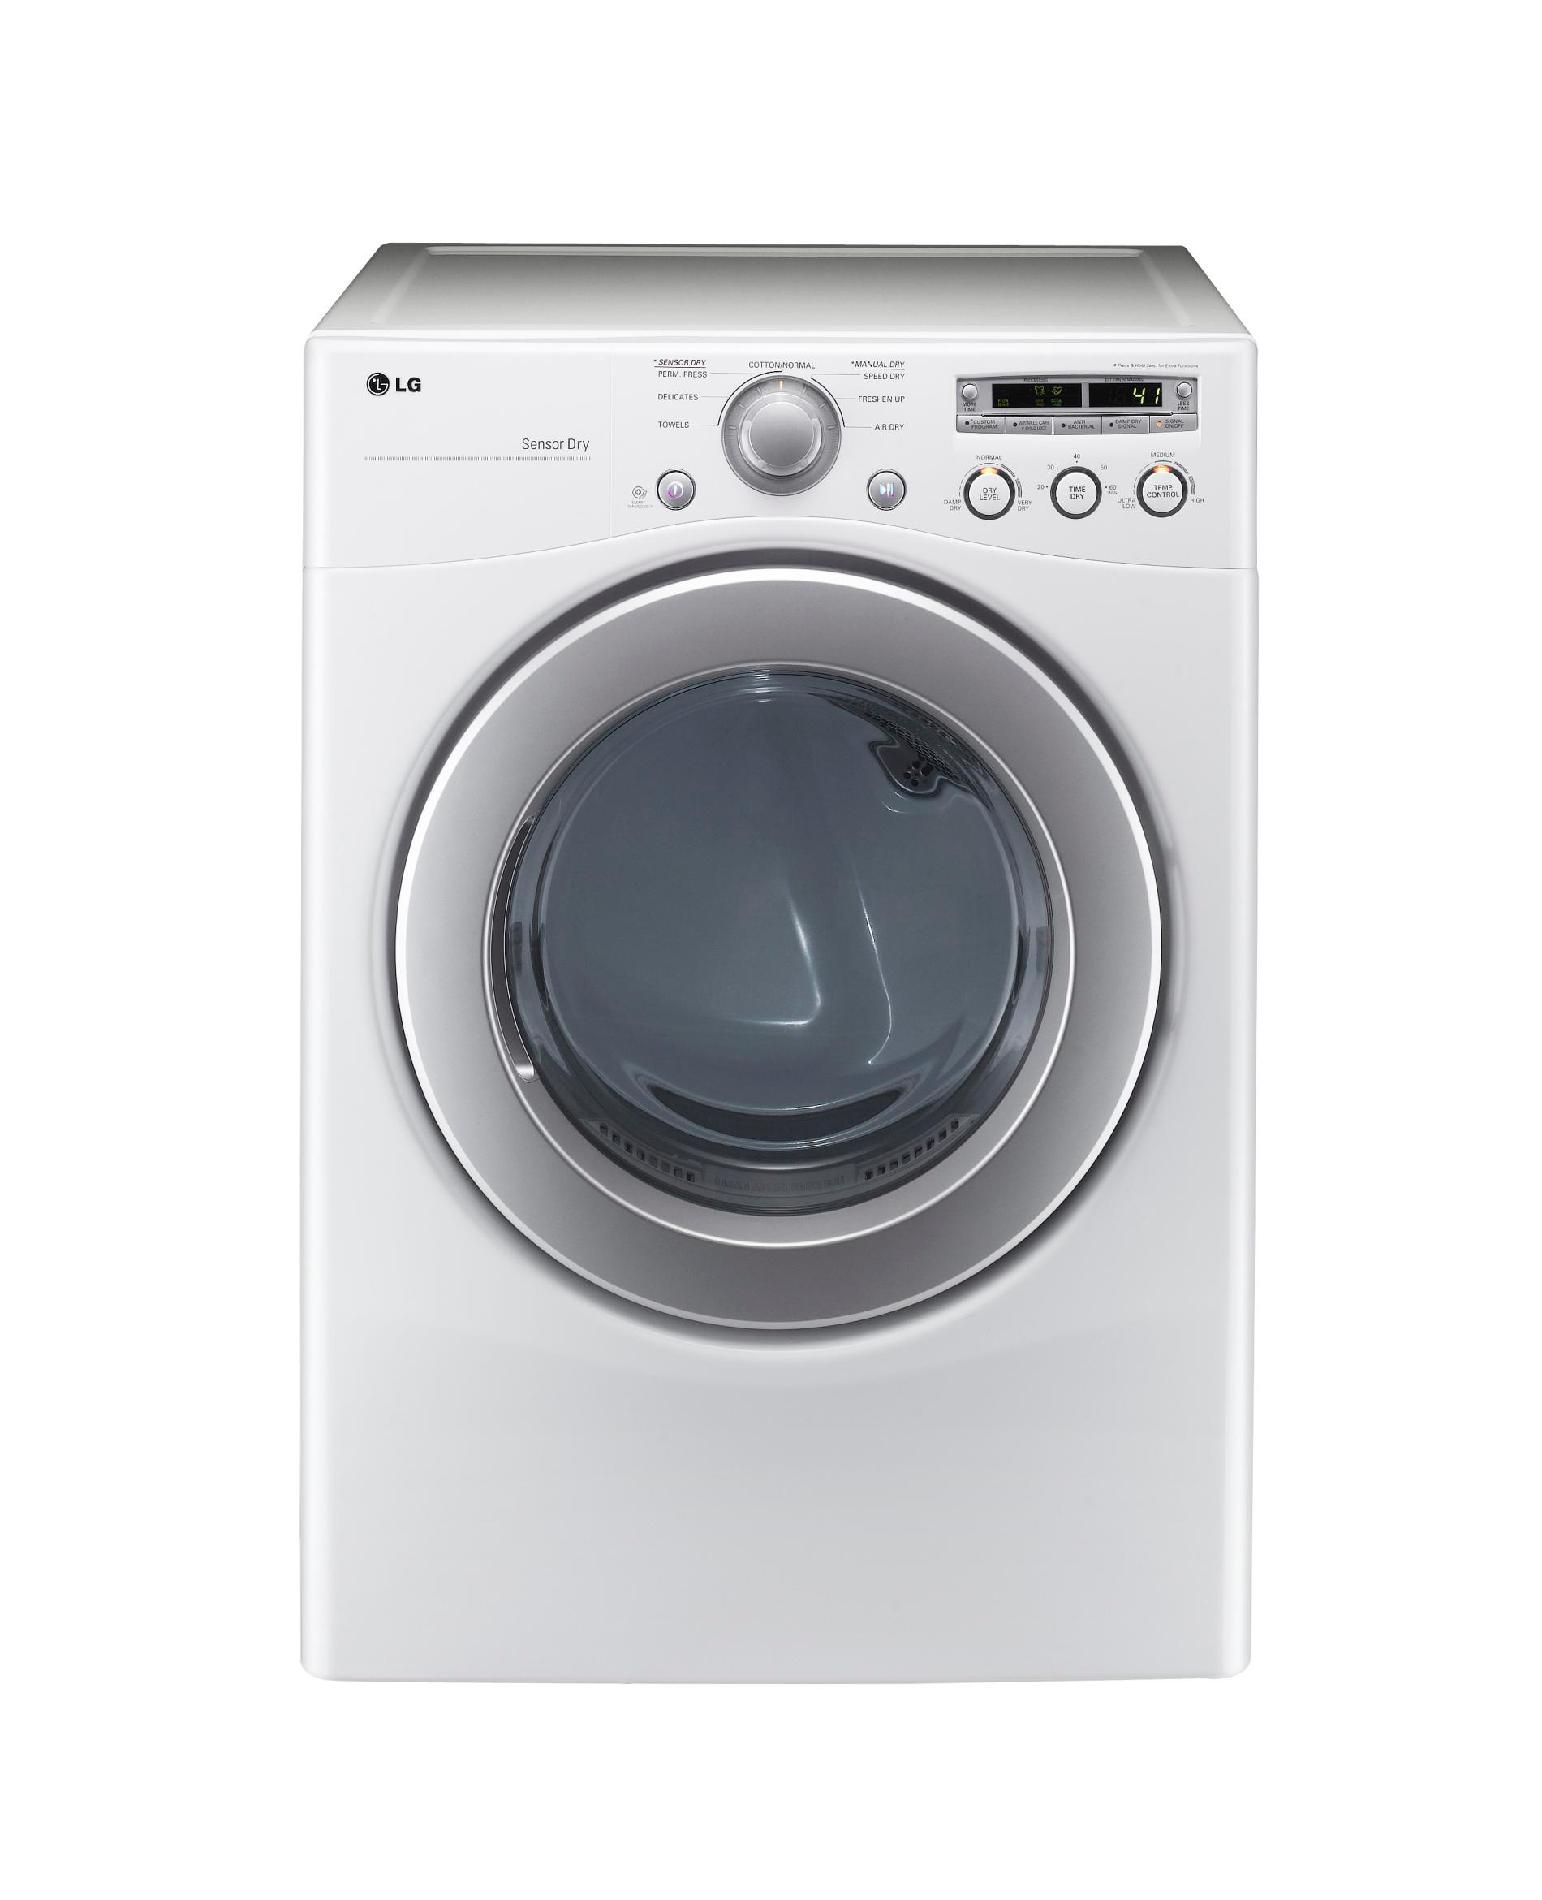 LG 7.1 cu. ft. Extra Large Capacity Electric Dryer with Sensor Dry - White